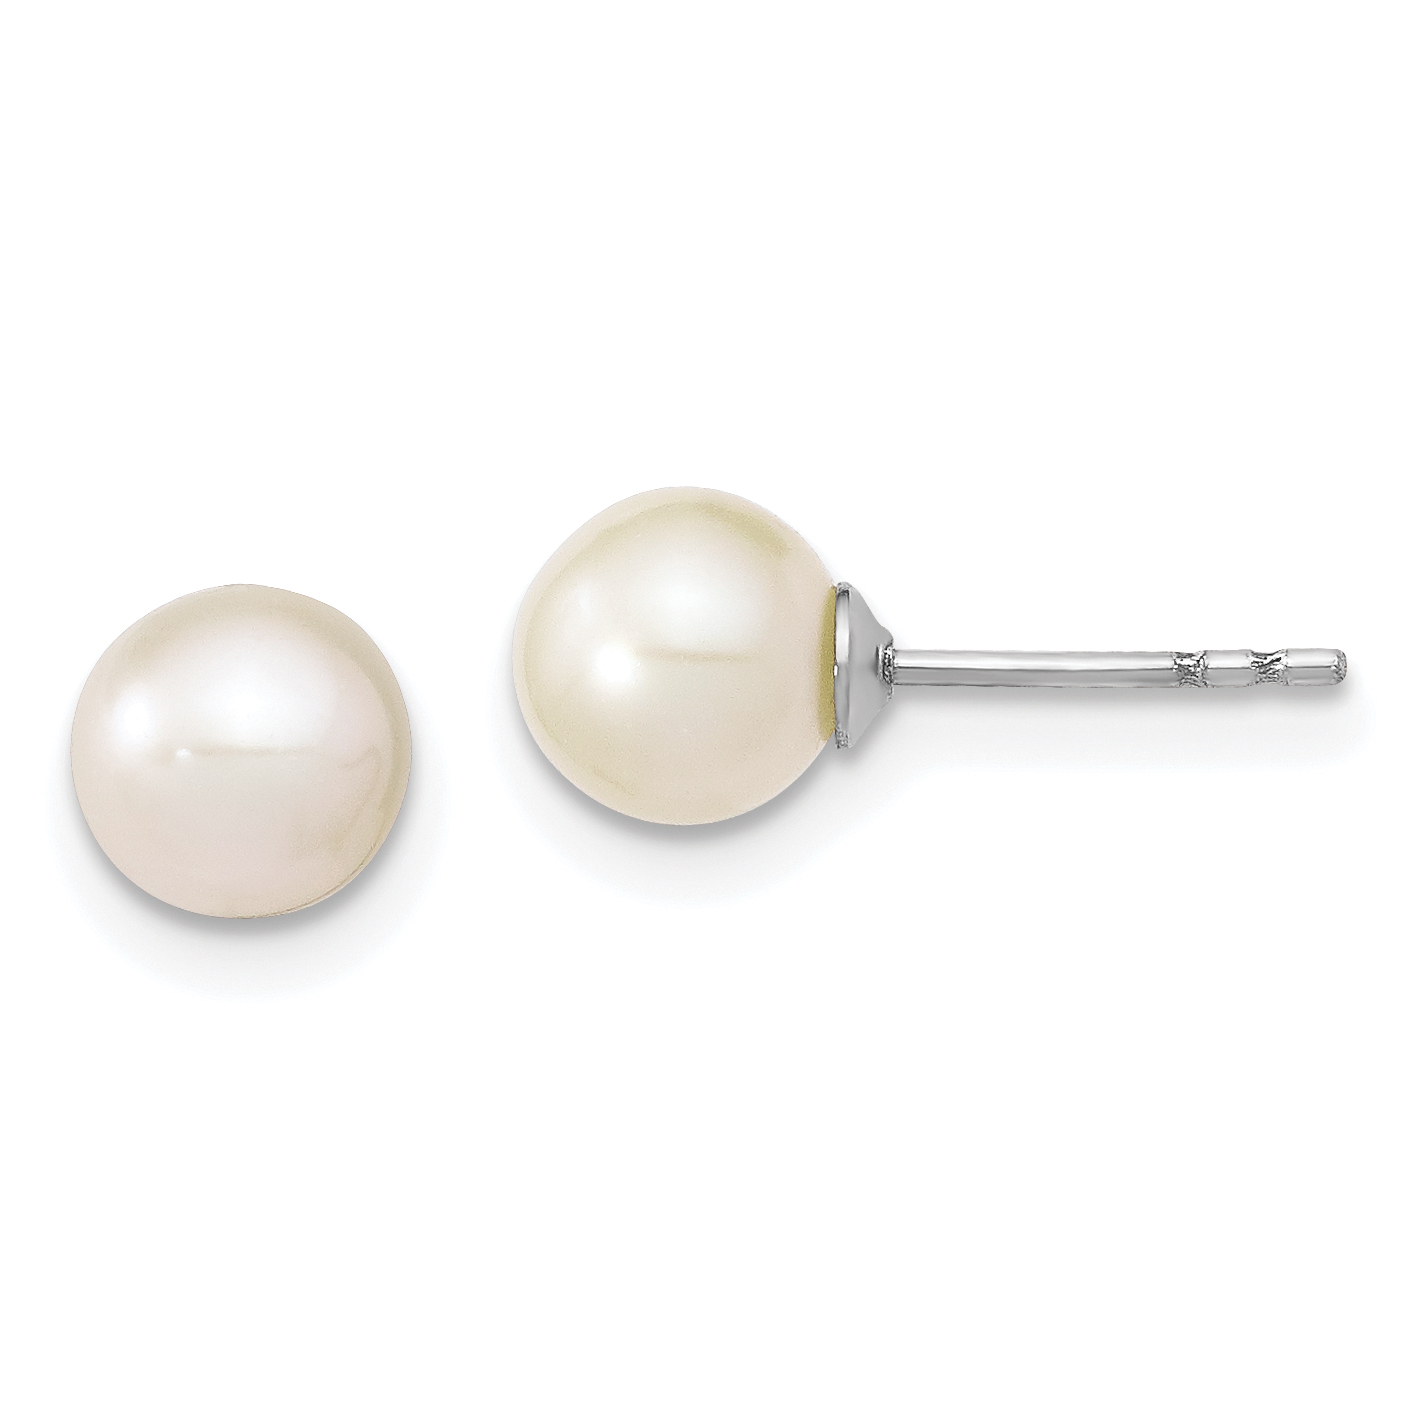 Core Silver Sterling Silver 6-7mm White Freshwater Cultured Round Pearl Stud Earrings